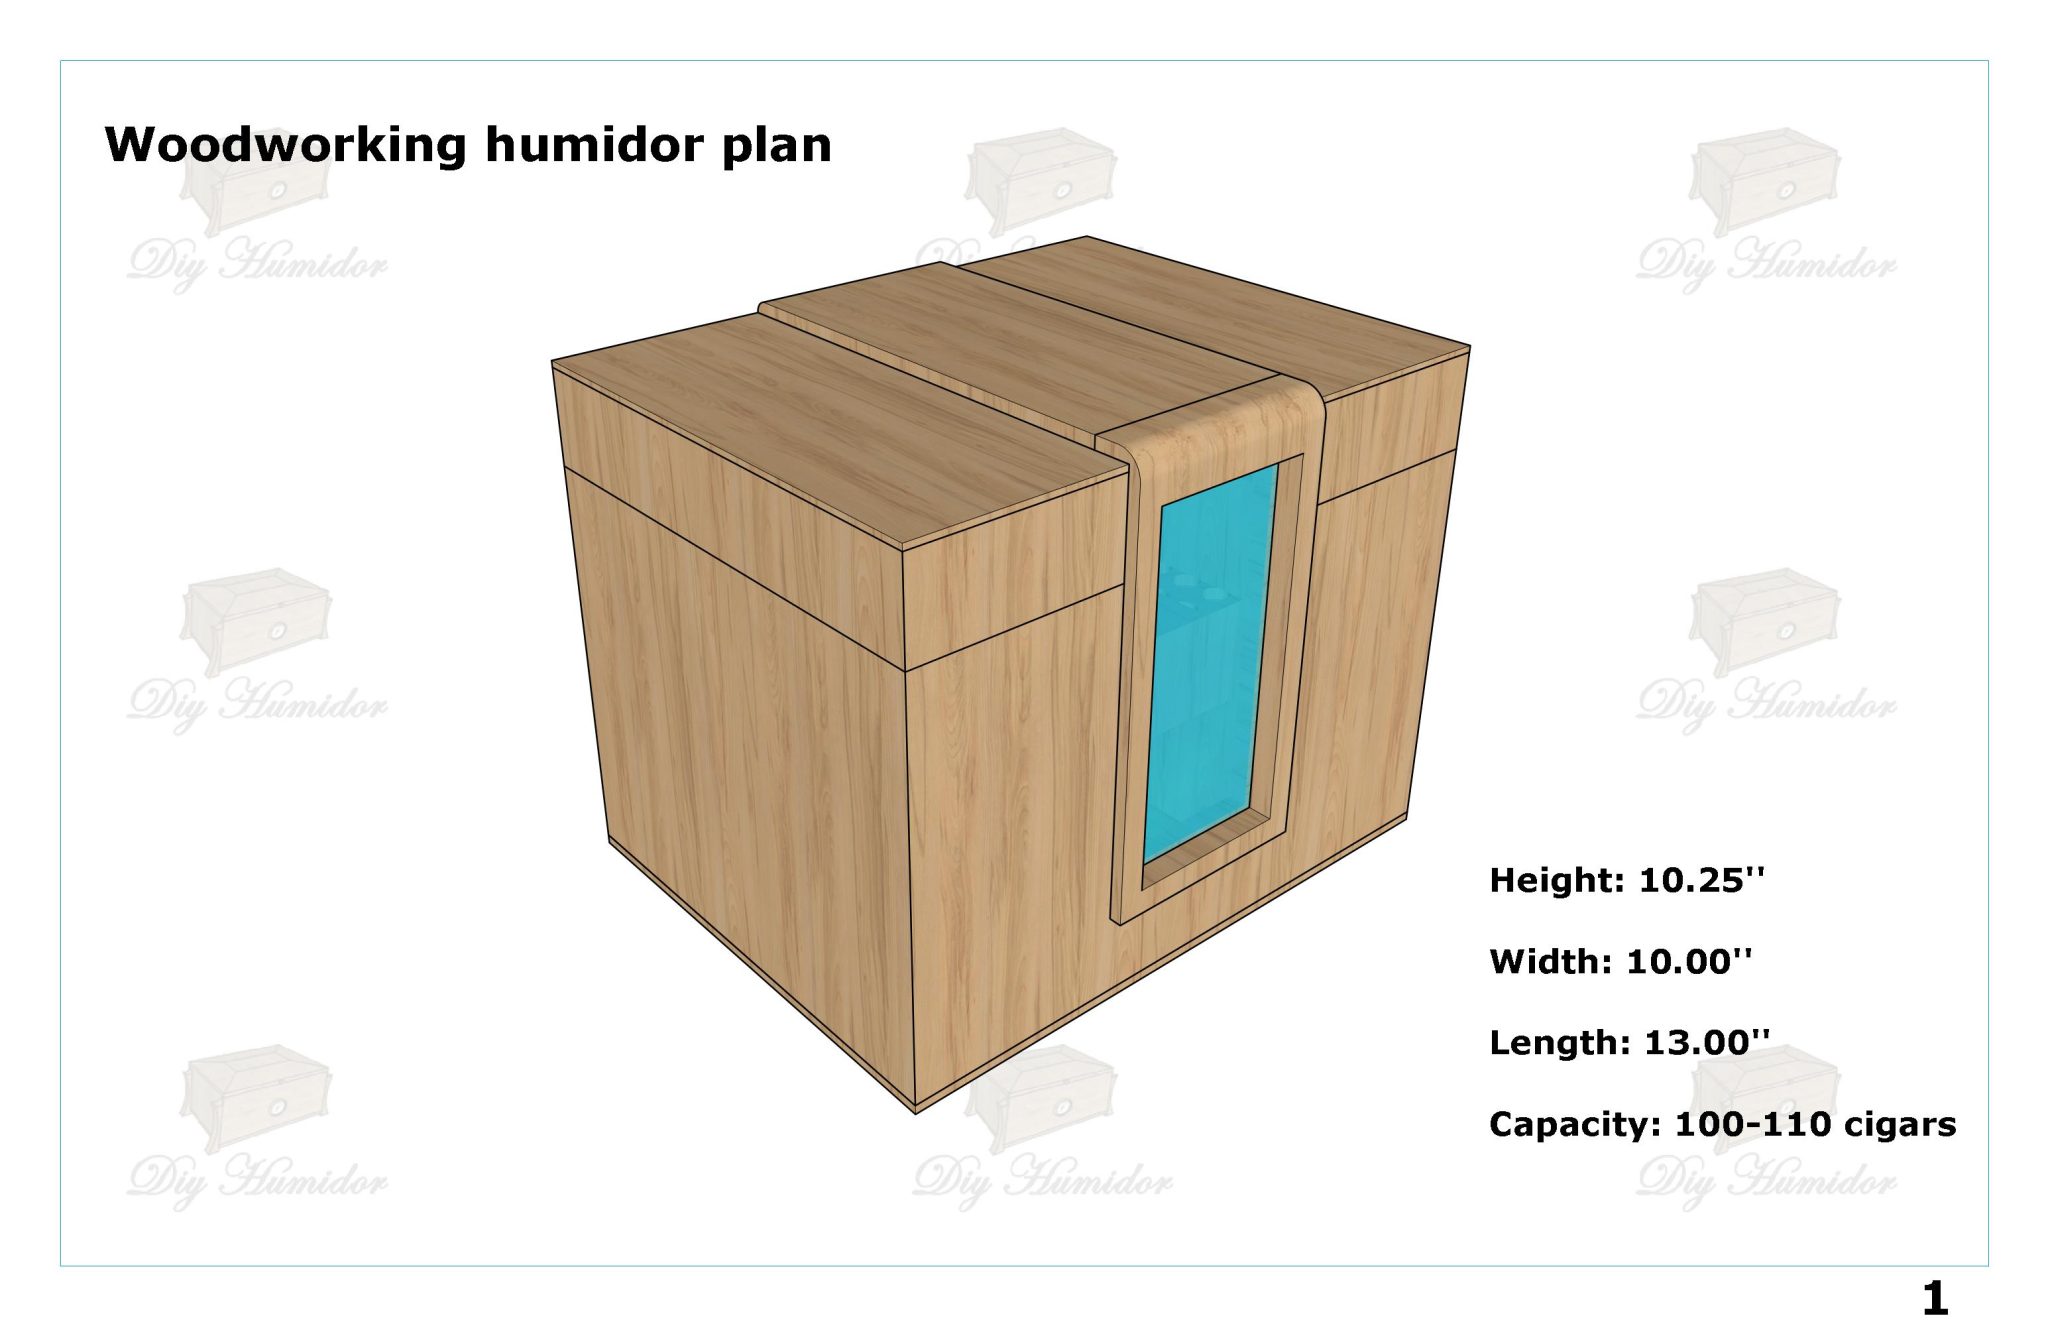 Woodworking humidor plans pdf free